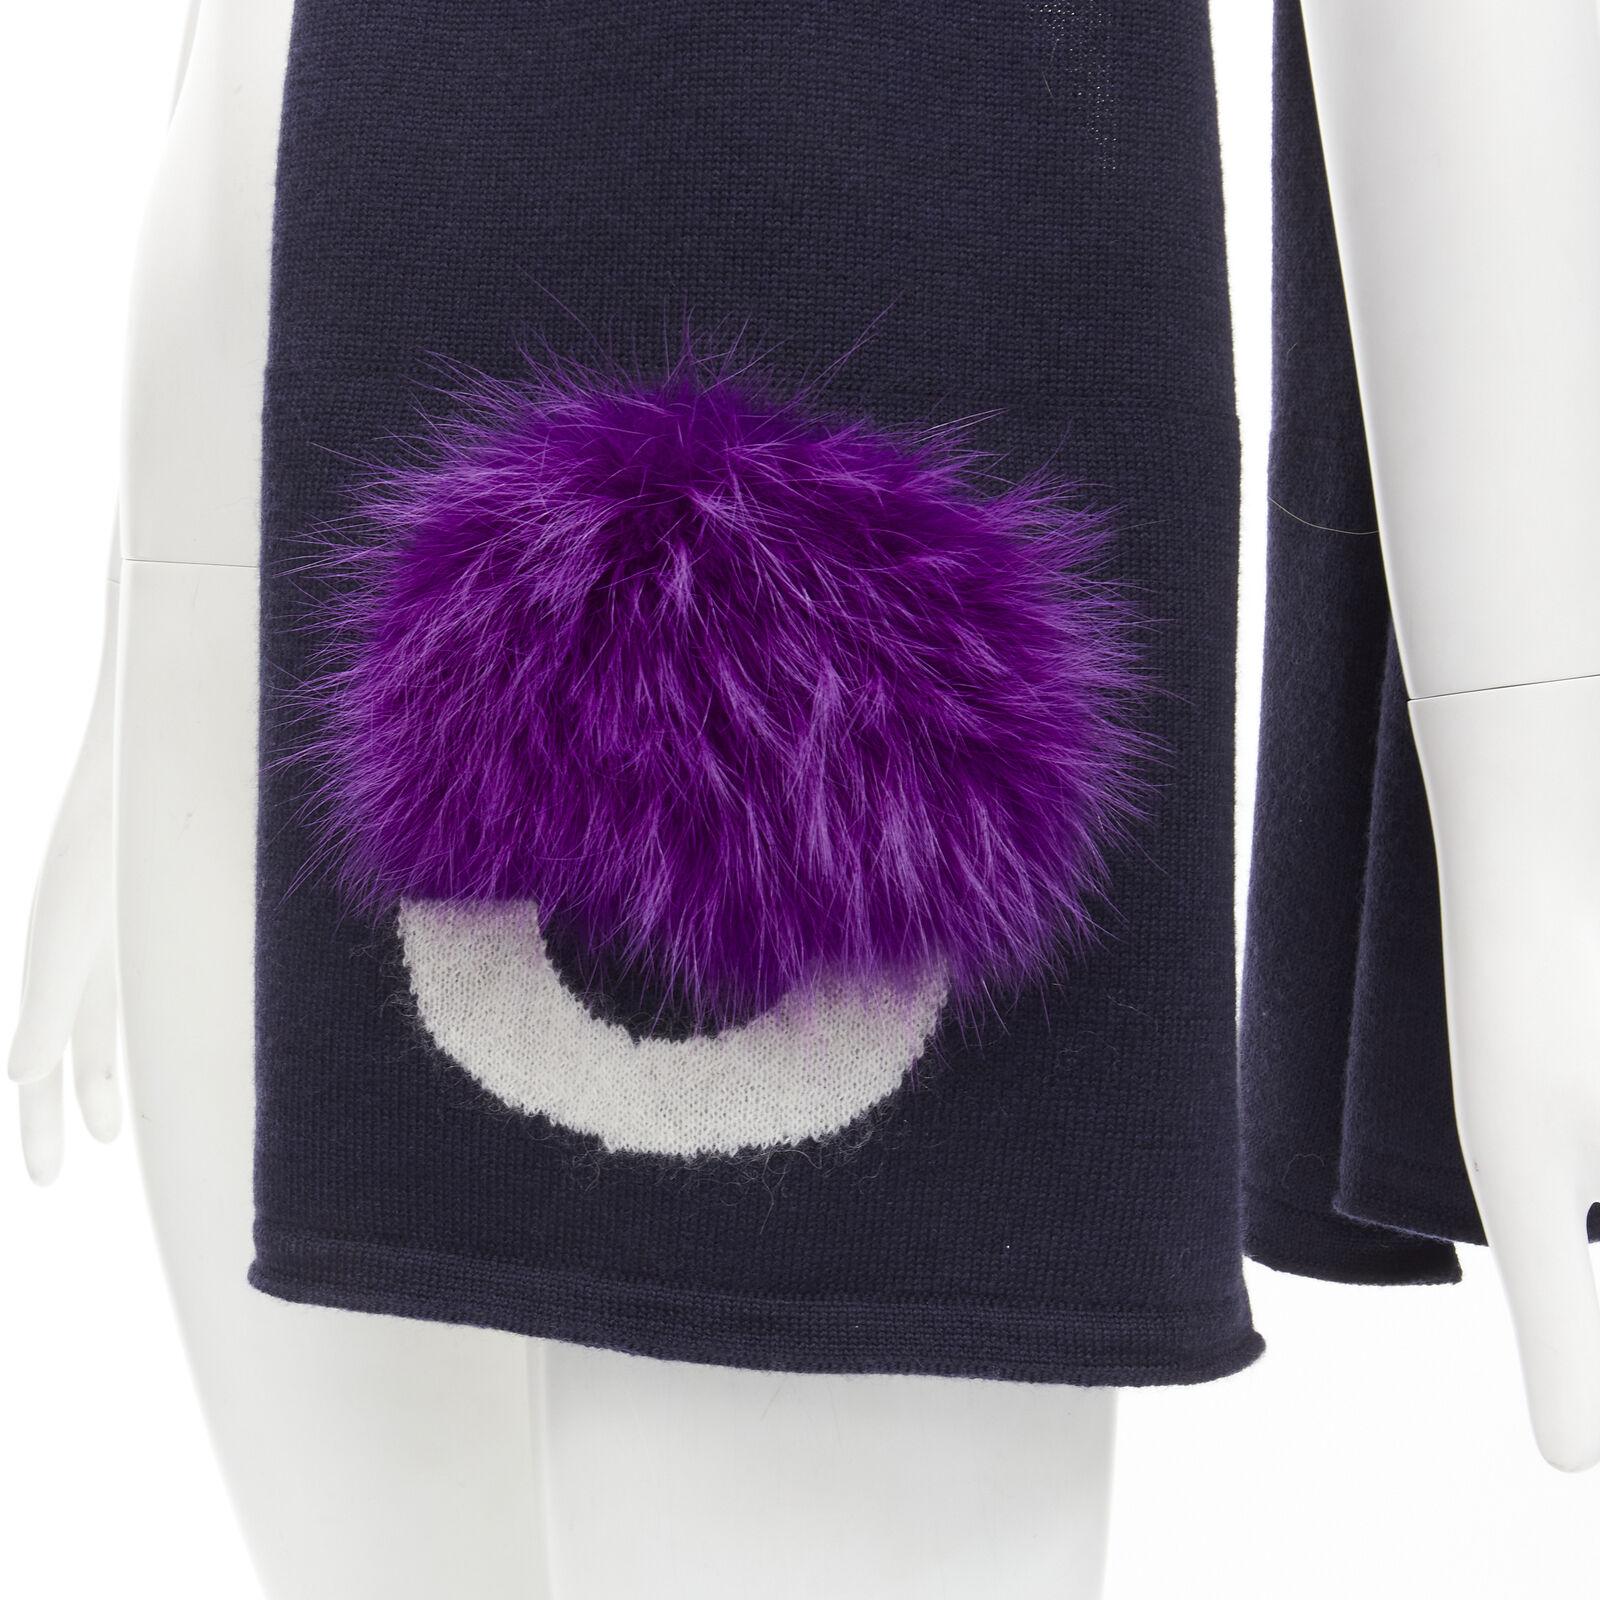 FENDI 100% wool navy blue Signature Monster Eyes purple fur trimmed scarf
Reference: ANWU/A00588
Brand: Fendi
Collection: Monster Bug
Material: Wool, Fur
Color: Navy, Purple
Pattern: Solid
Extra Details: Black signature monster eyes scarf with